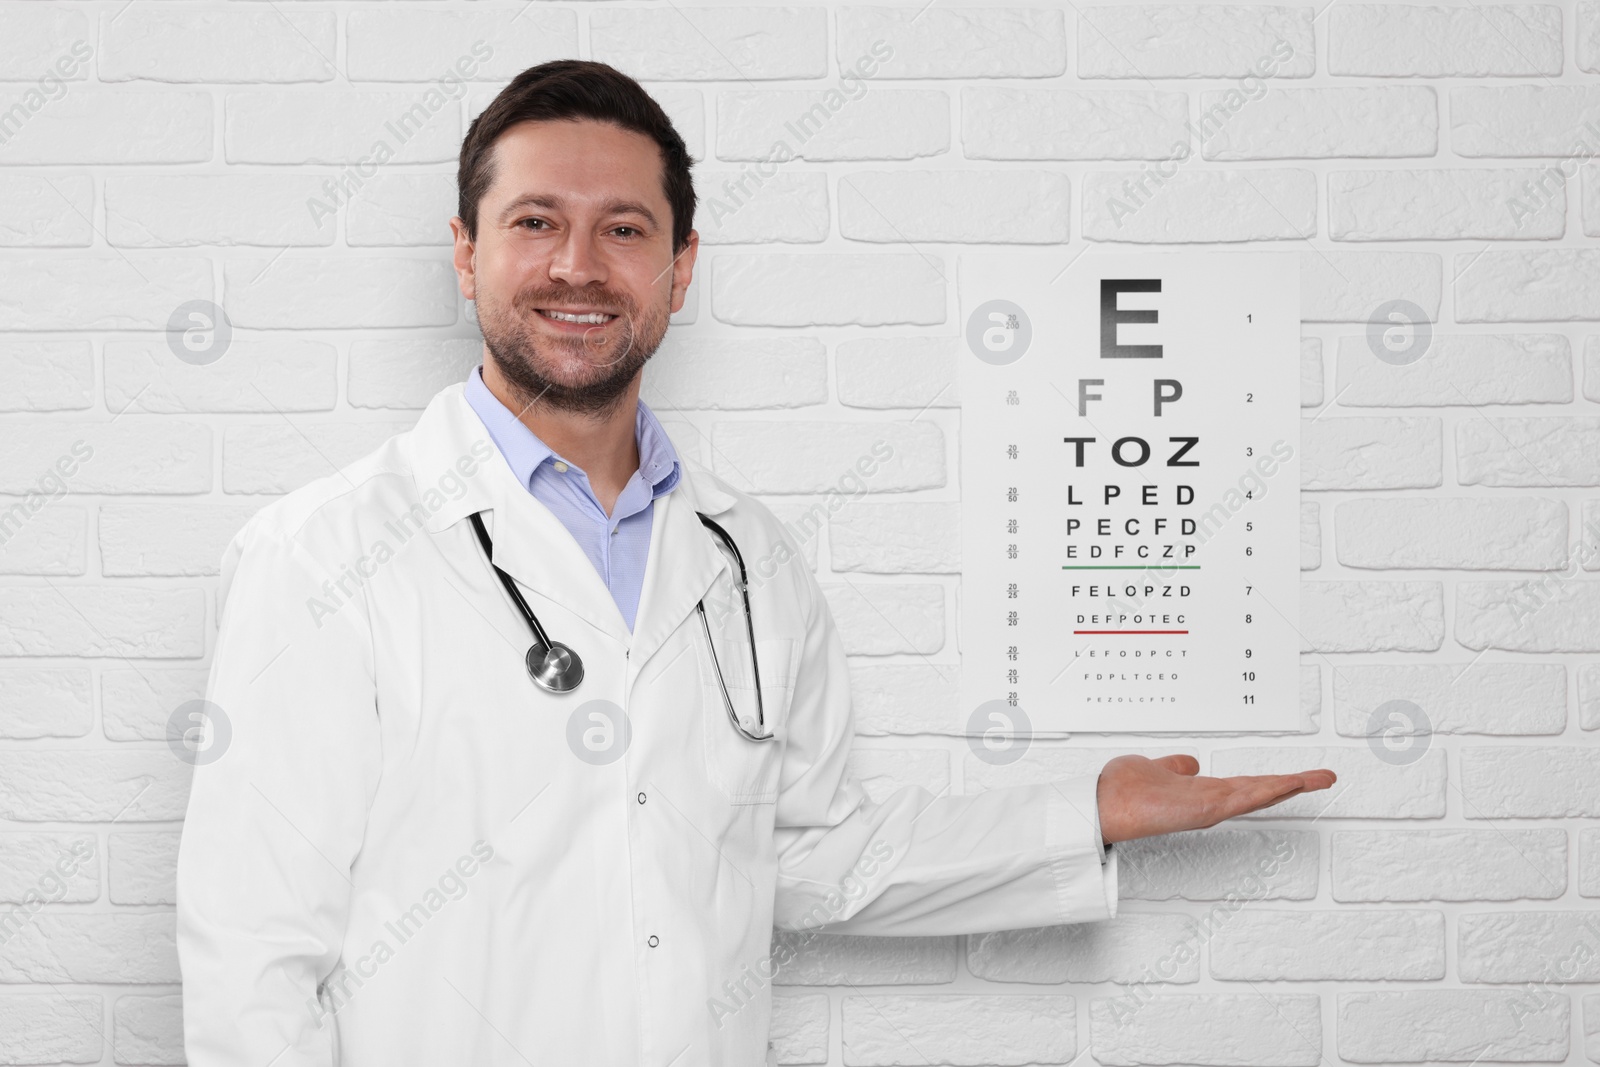 Photo of Ophthalmologist showing vision test chart on white brick wall